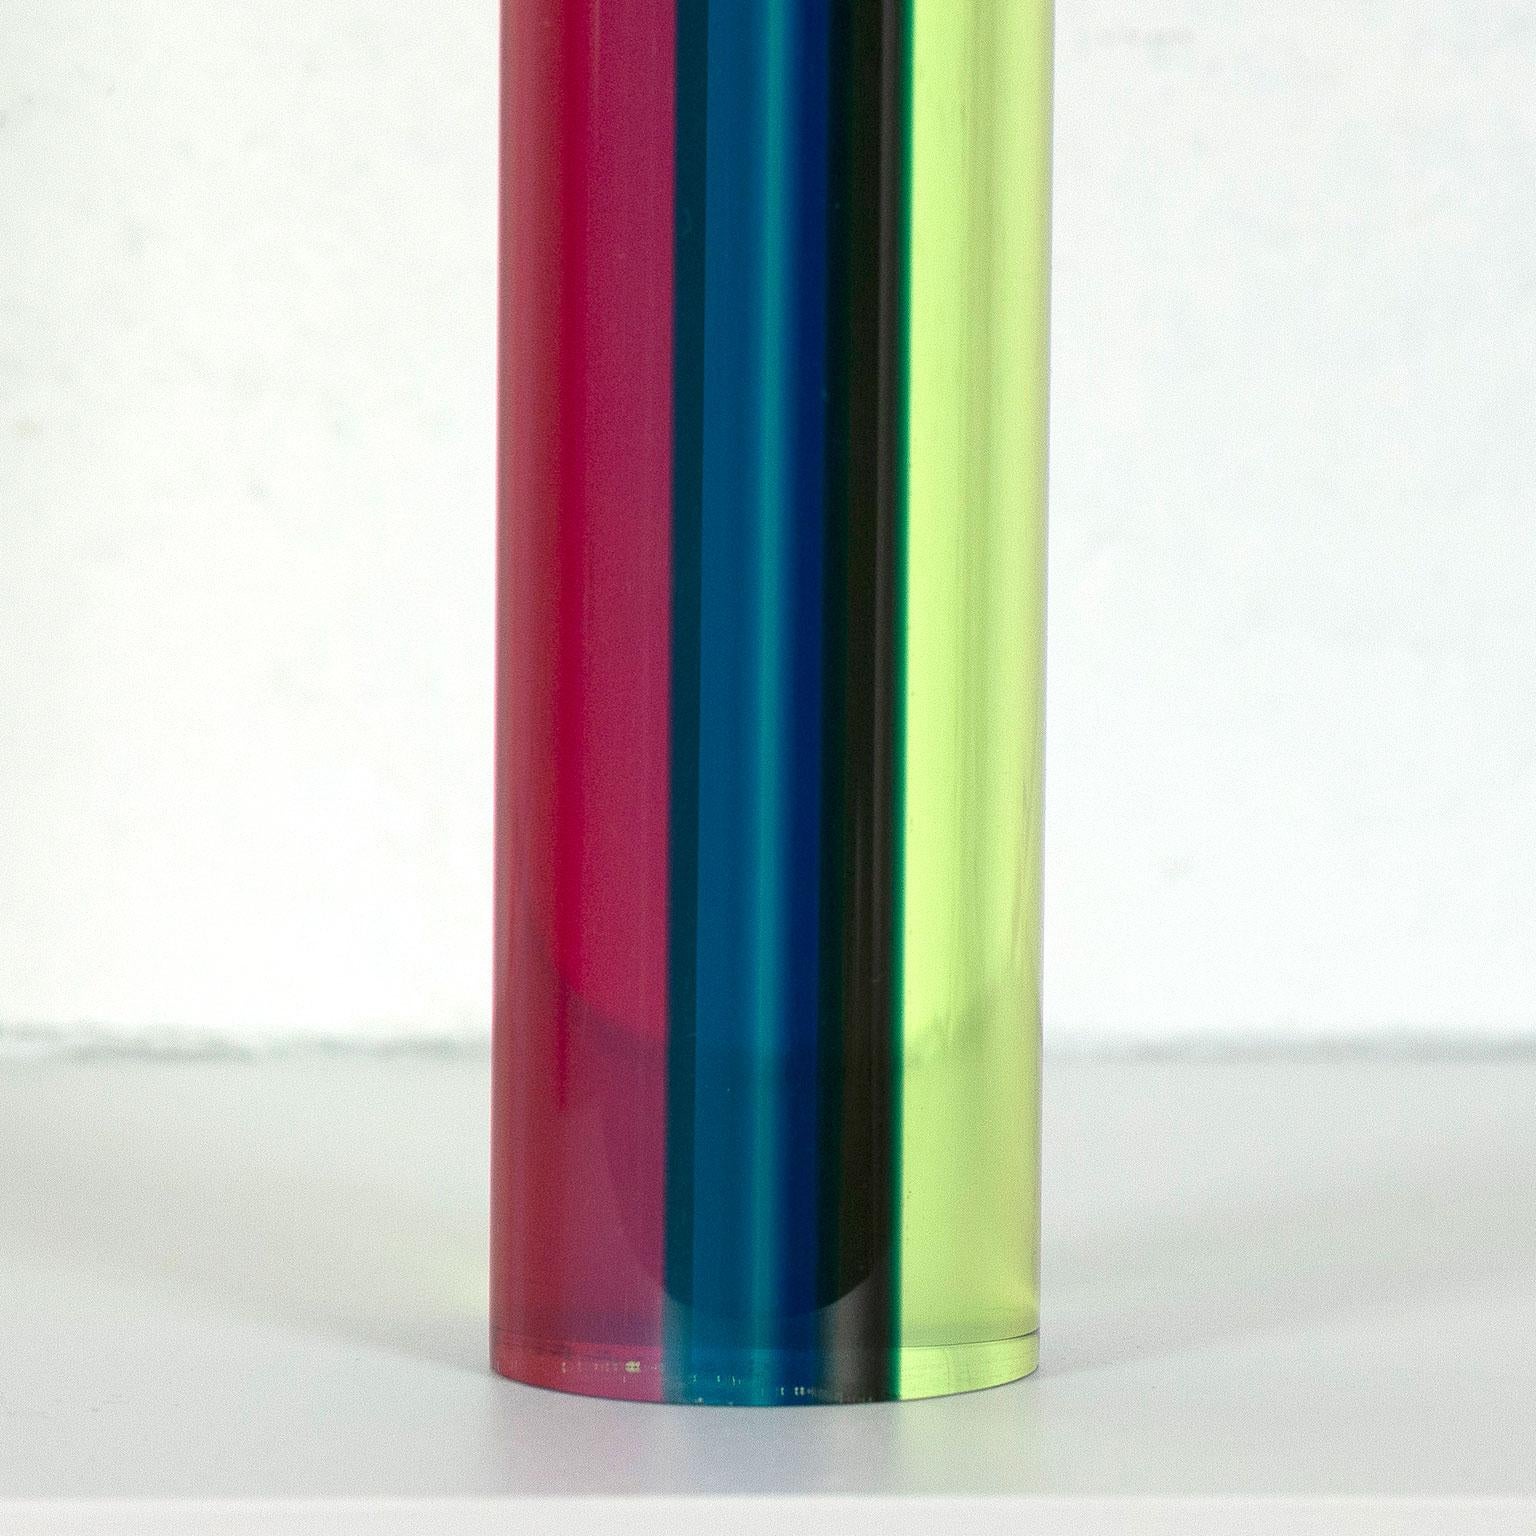 This is a vibrant new example of Vasa Mihich's unique and delightful cylinder sculptures. 

This cylindrical sculpture is an ideal table or desktop size, emitting colorful shadows far greater than it's scale. The cylinder is bisected vertically by a